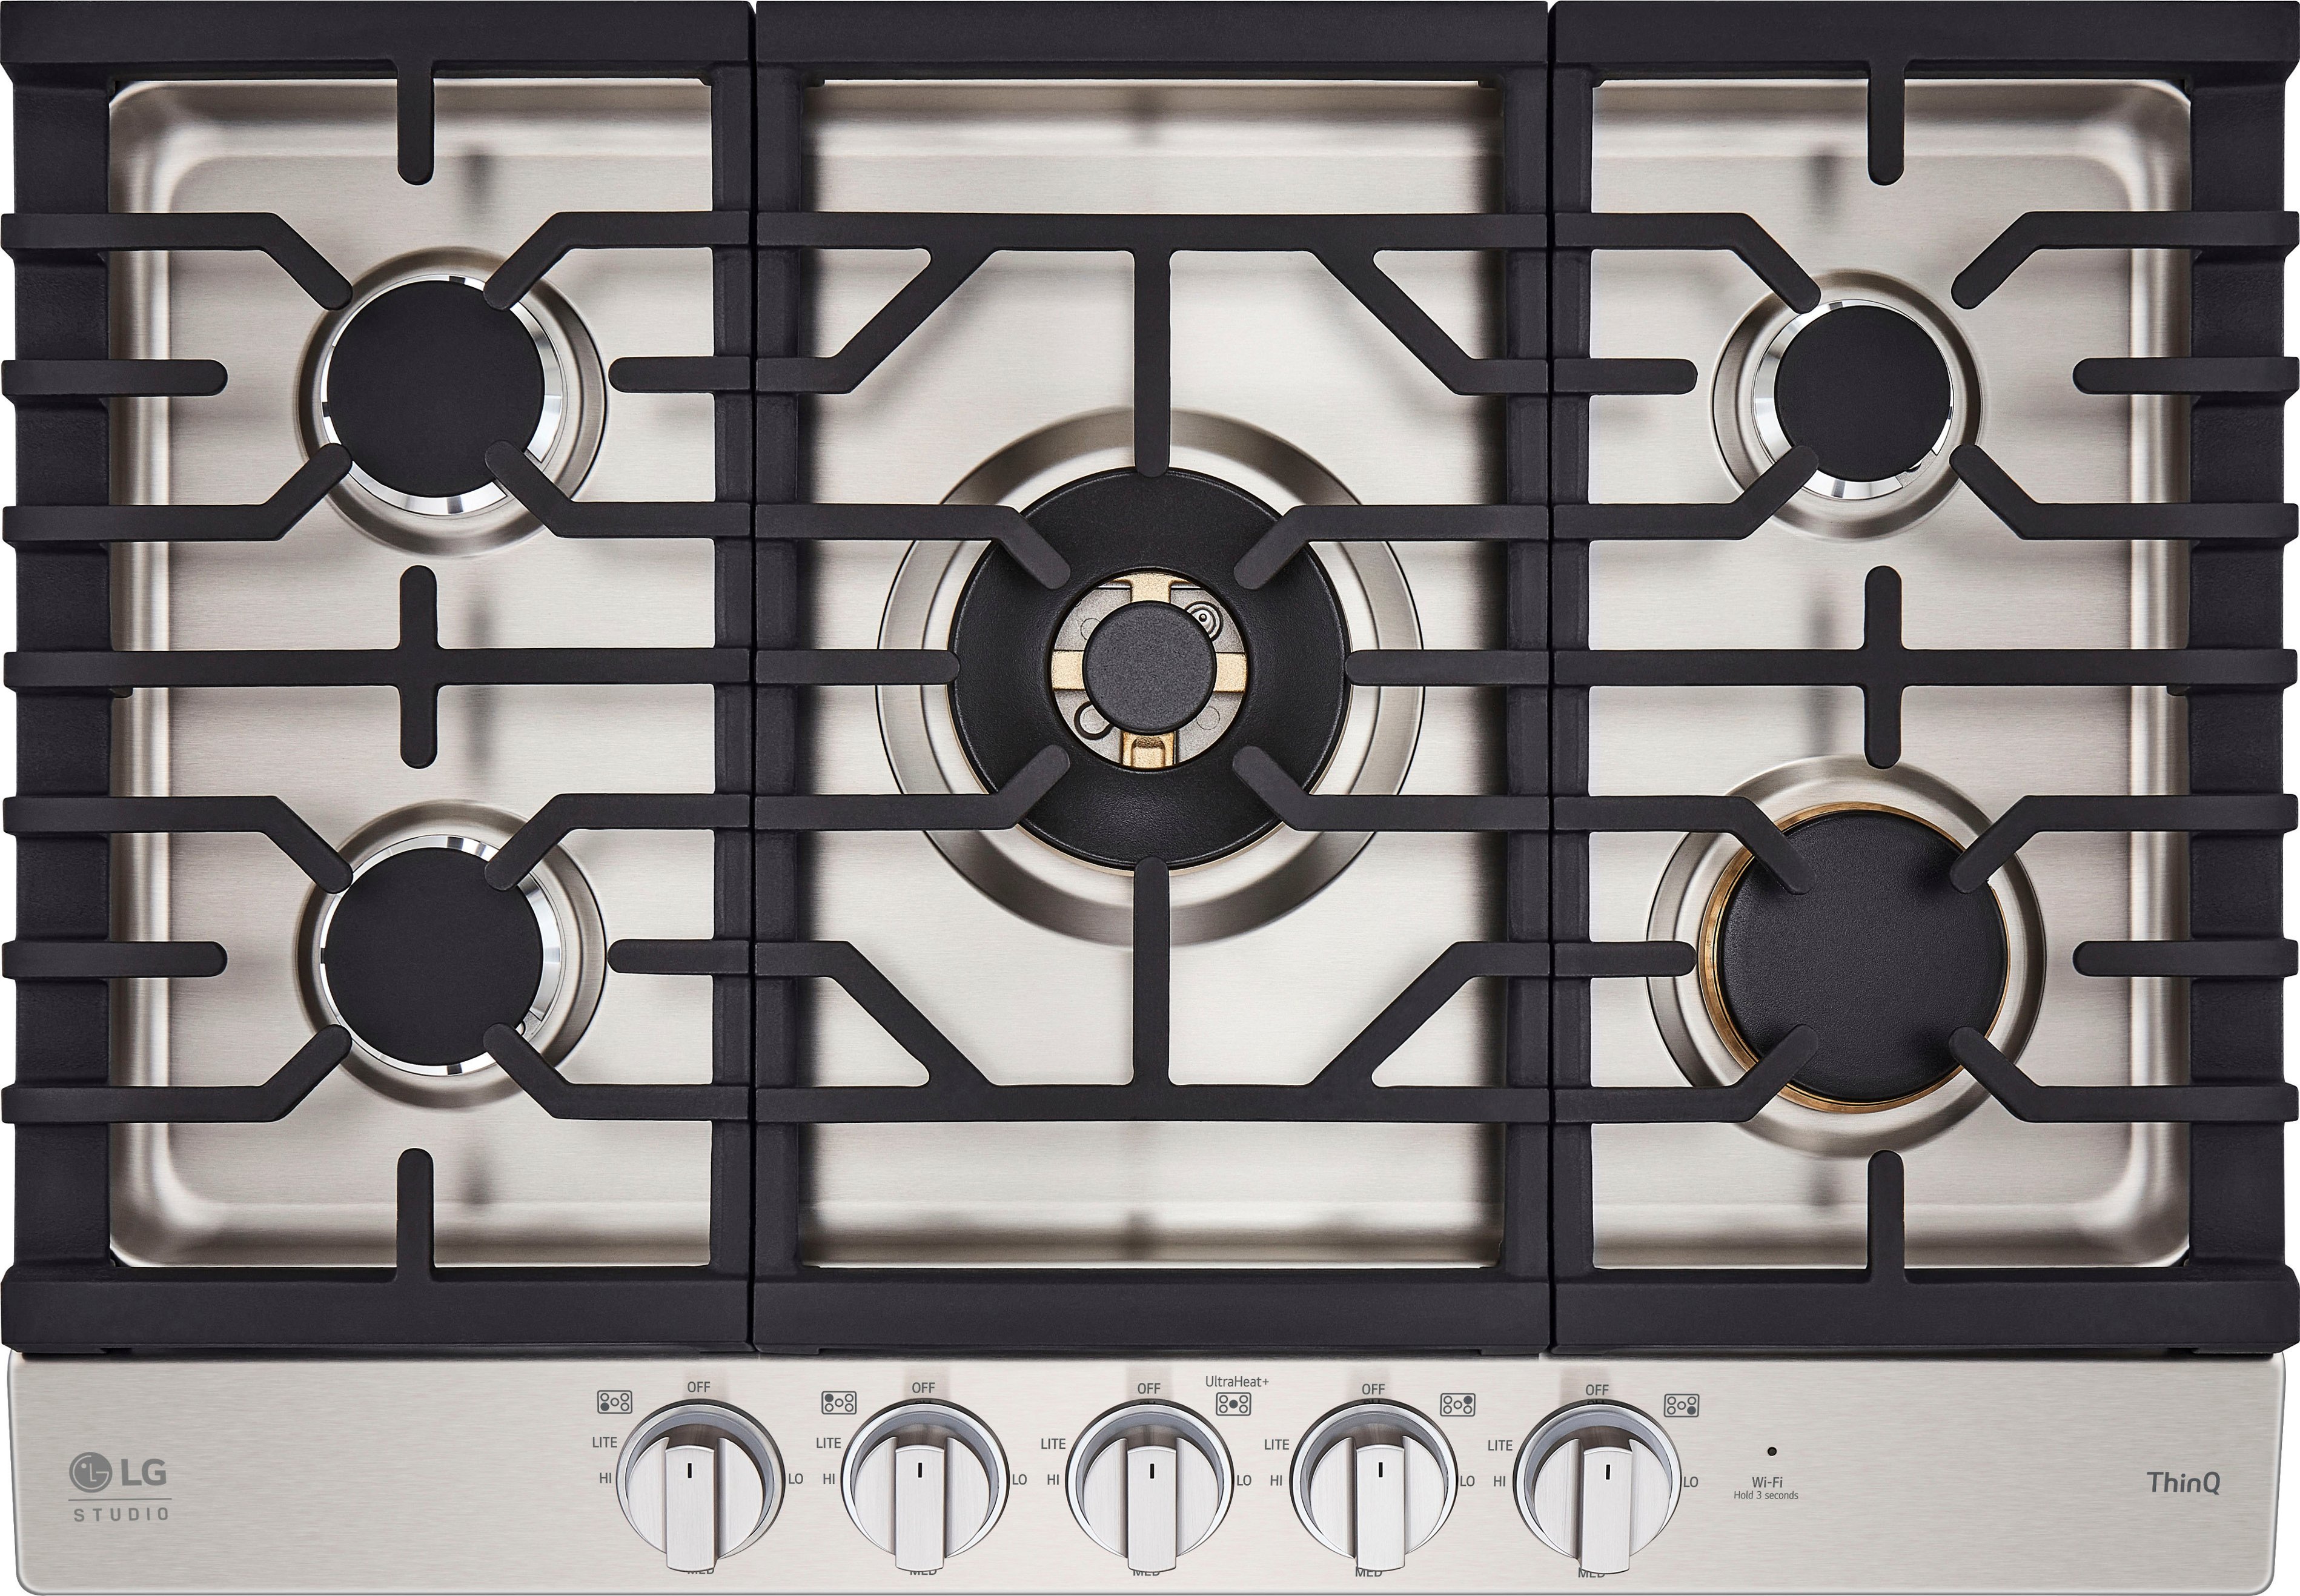 LG STUDIO 30 Built-In Gas Cooktop with 5 Burners and UltraHeat Stainless  Steel LSCG307ST - Best Buy